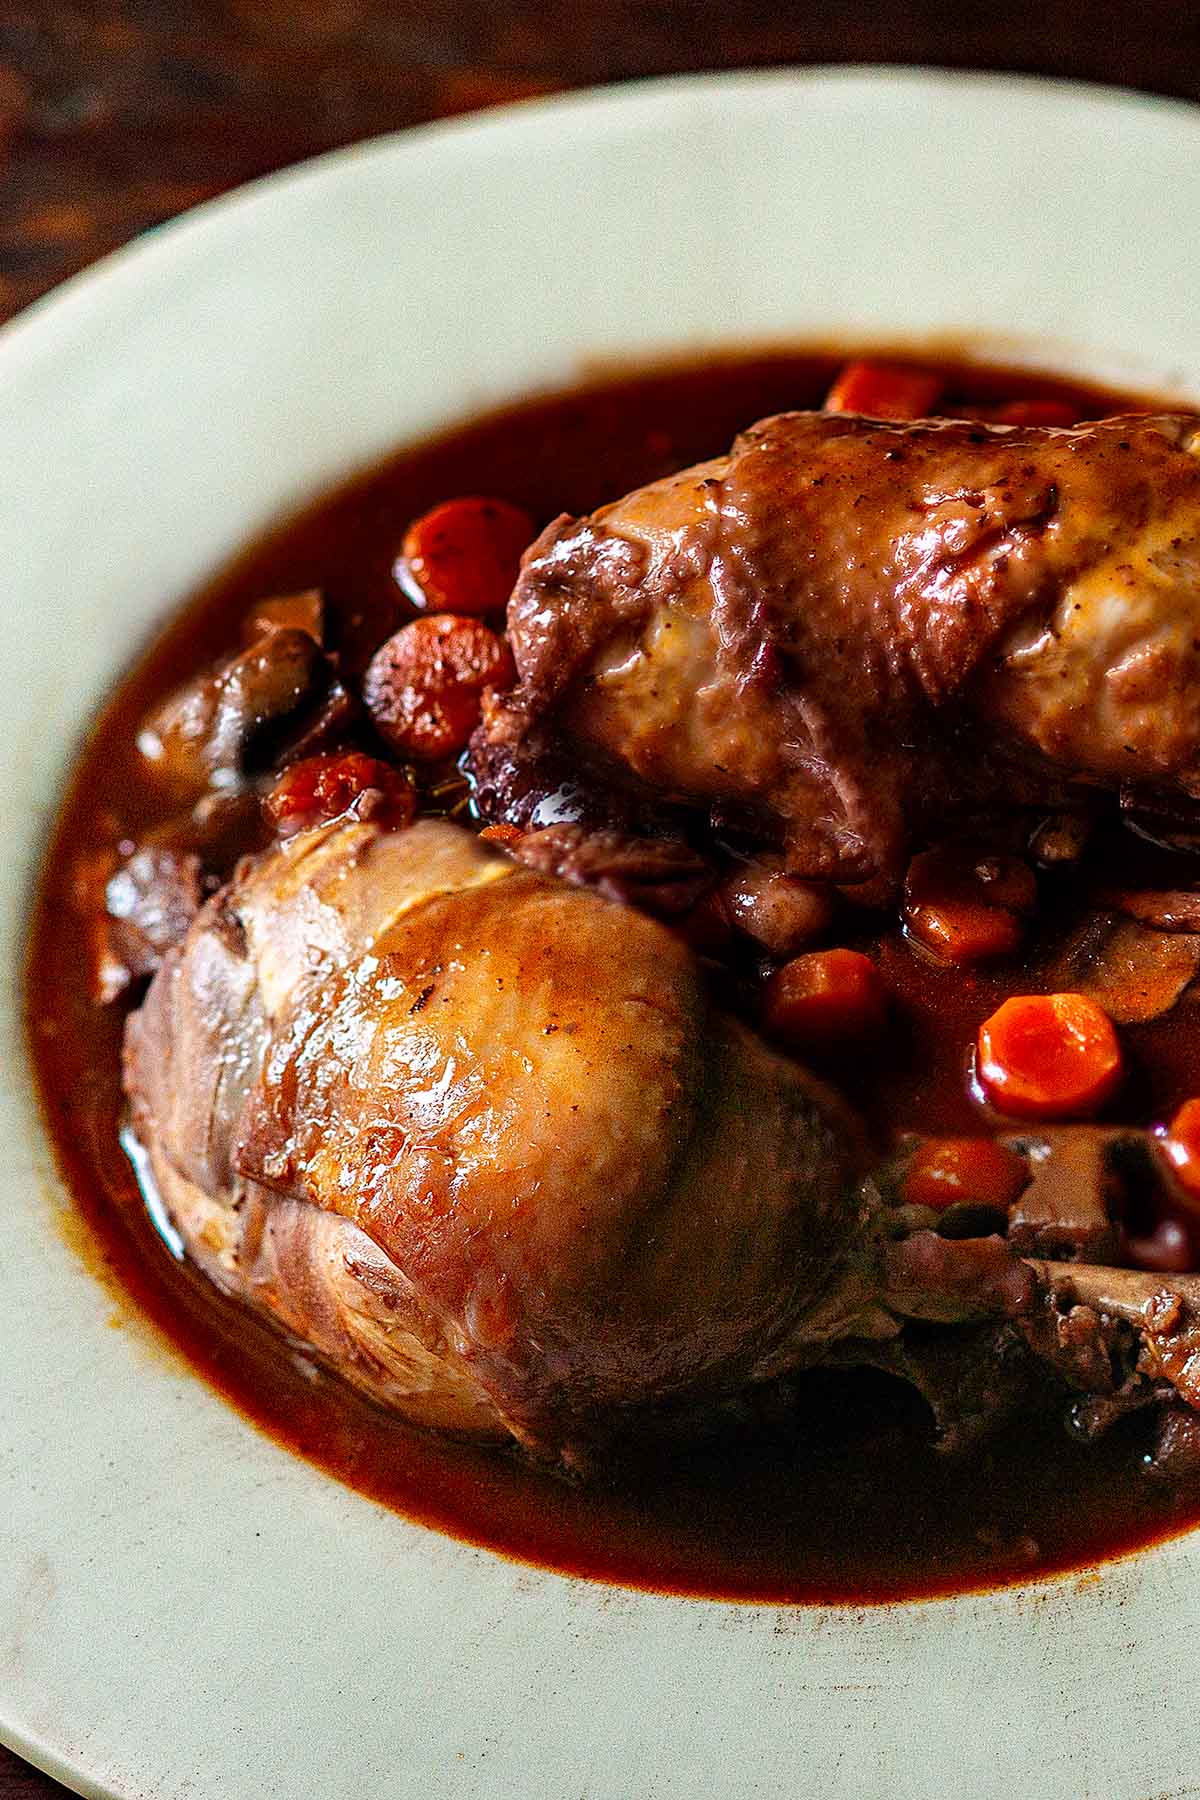 Coq au Vin served on a large plate.